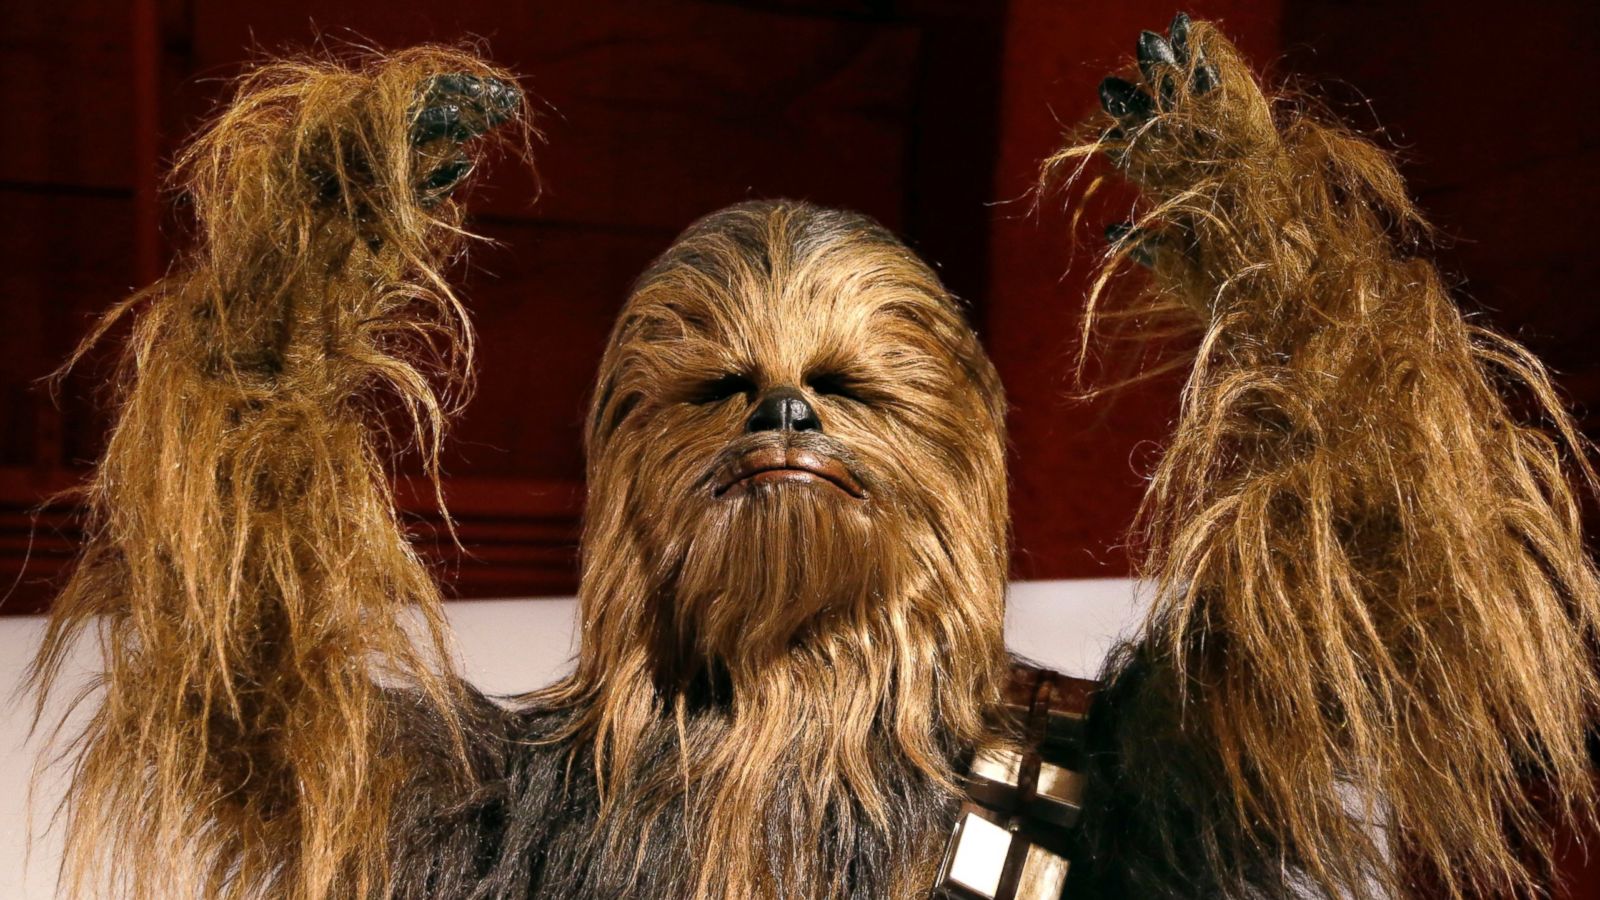 Chewbacca Mask Sold Out Online Woman's Video Goes Super Viral - ABC